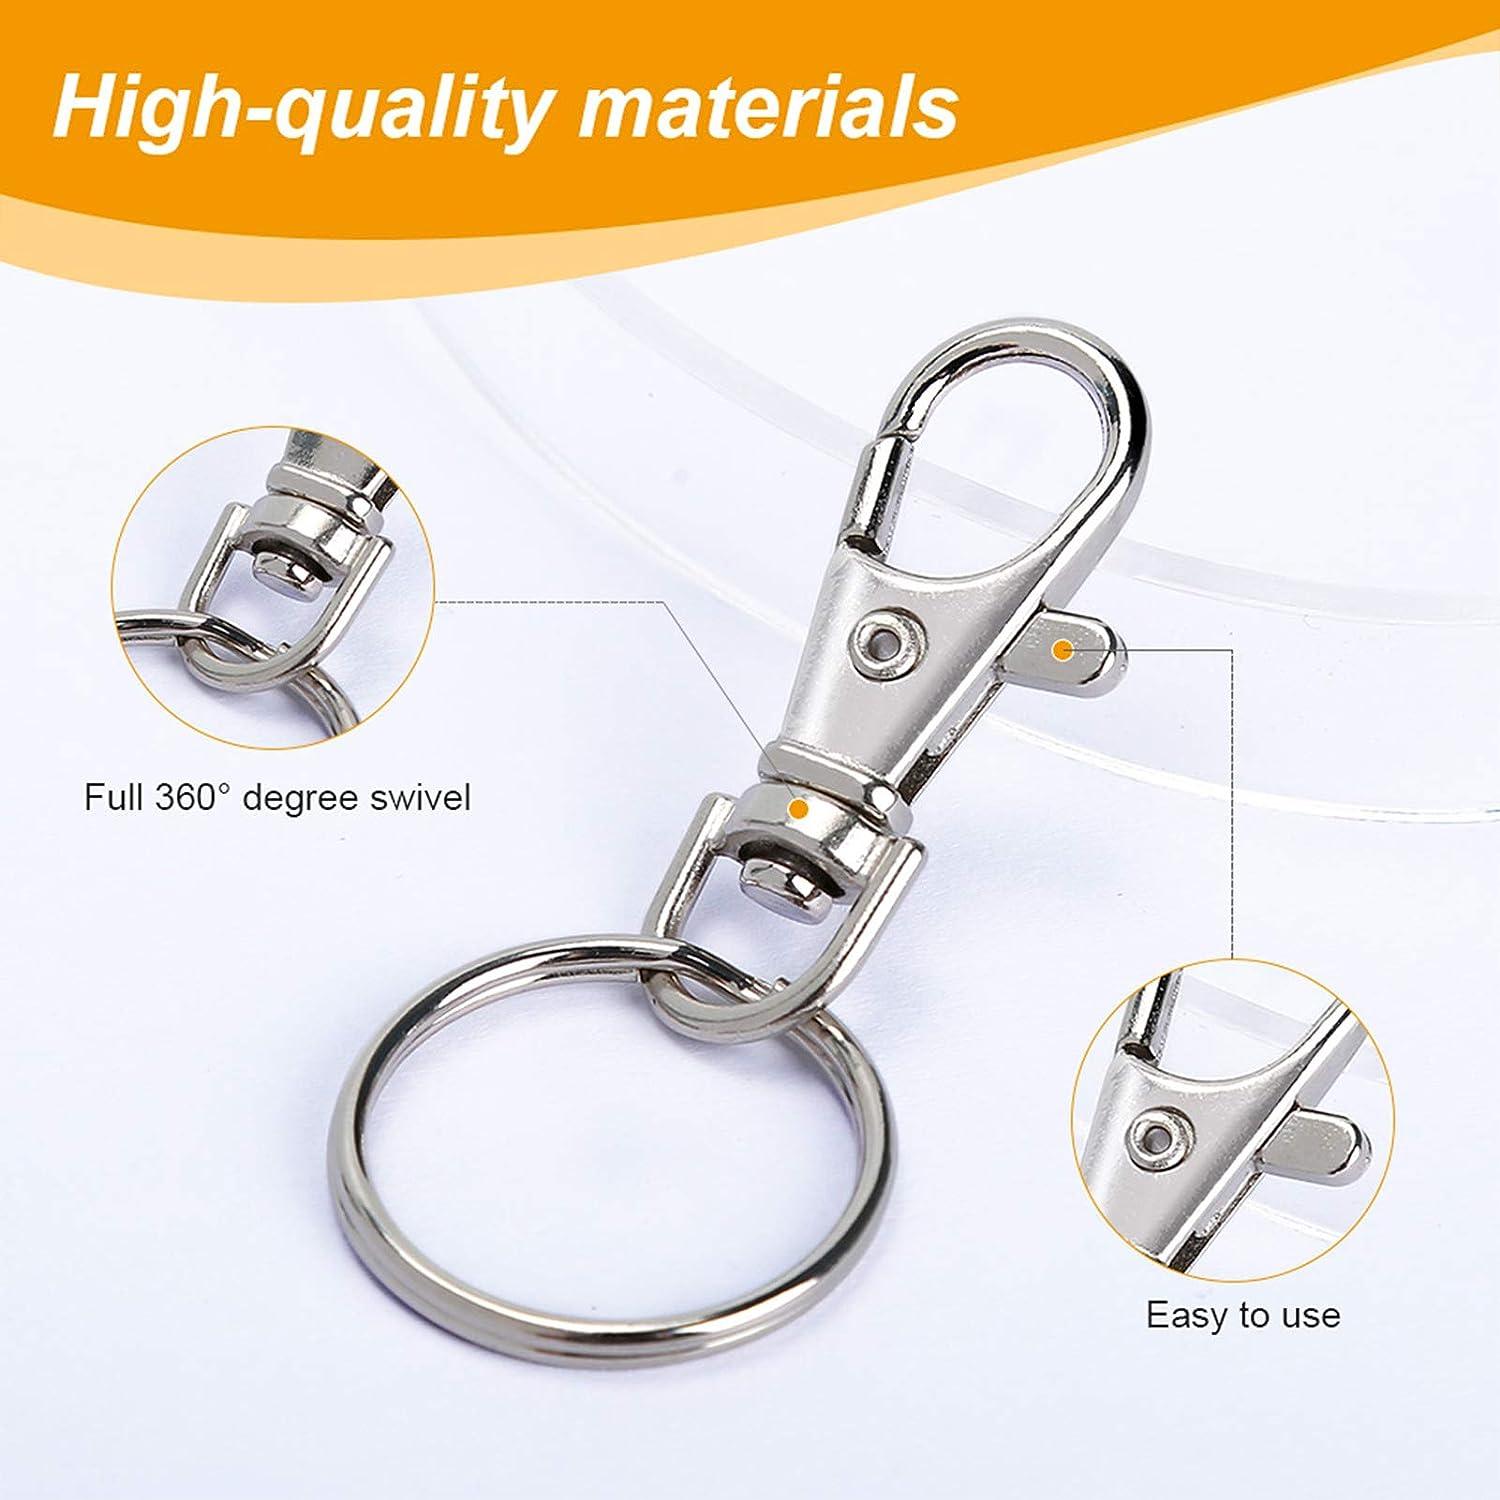 Alloy Swivel Lanyard Snap Hook Lobster Claw Clasps Jewelry Making